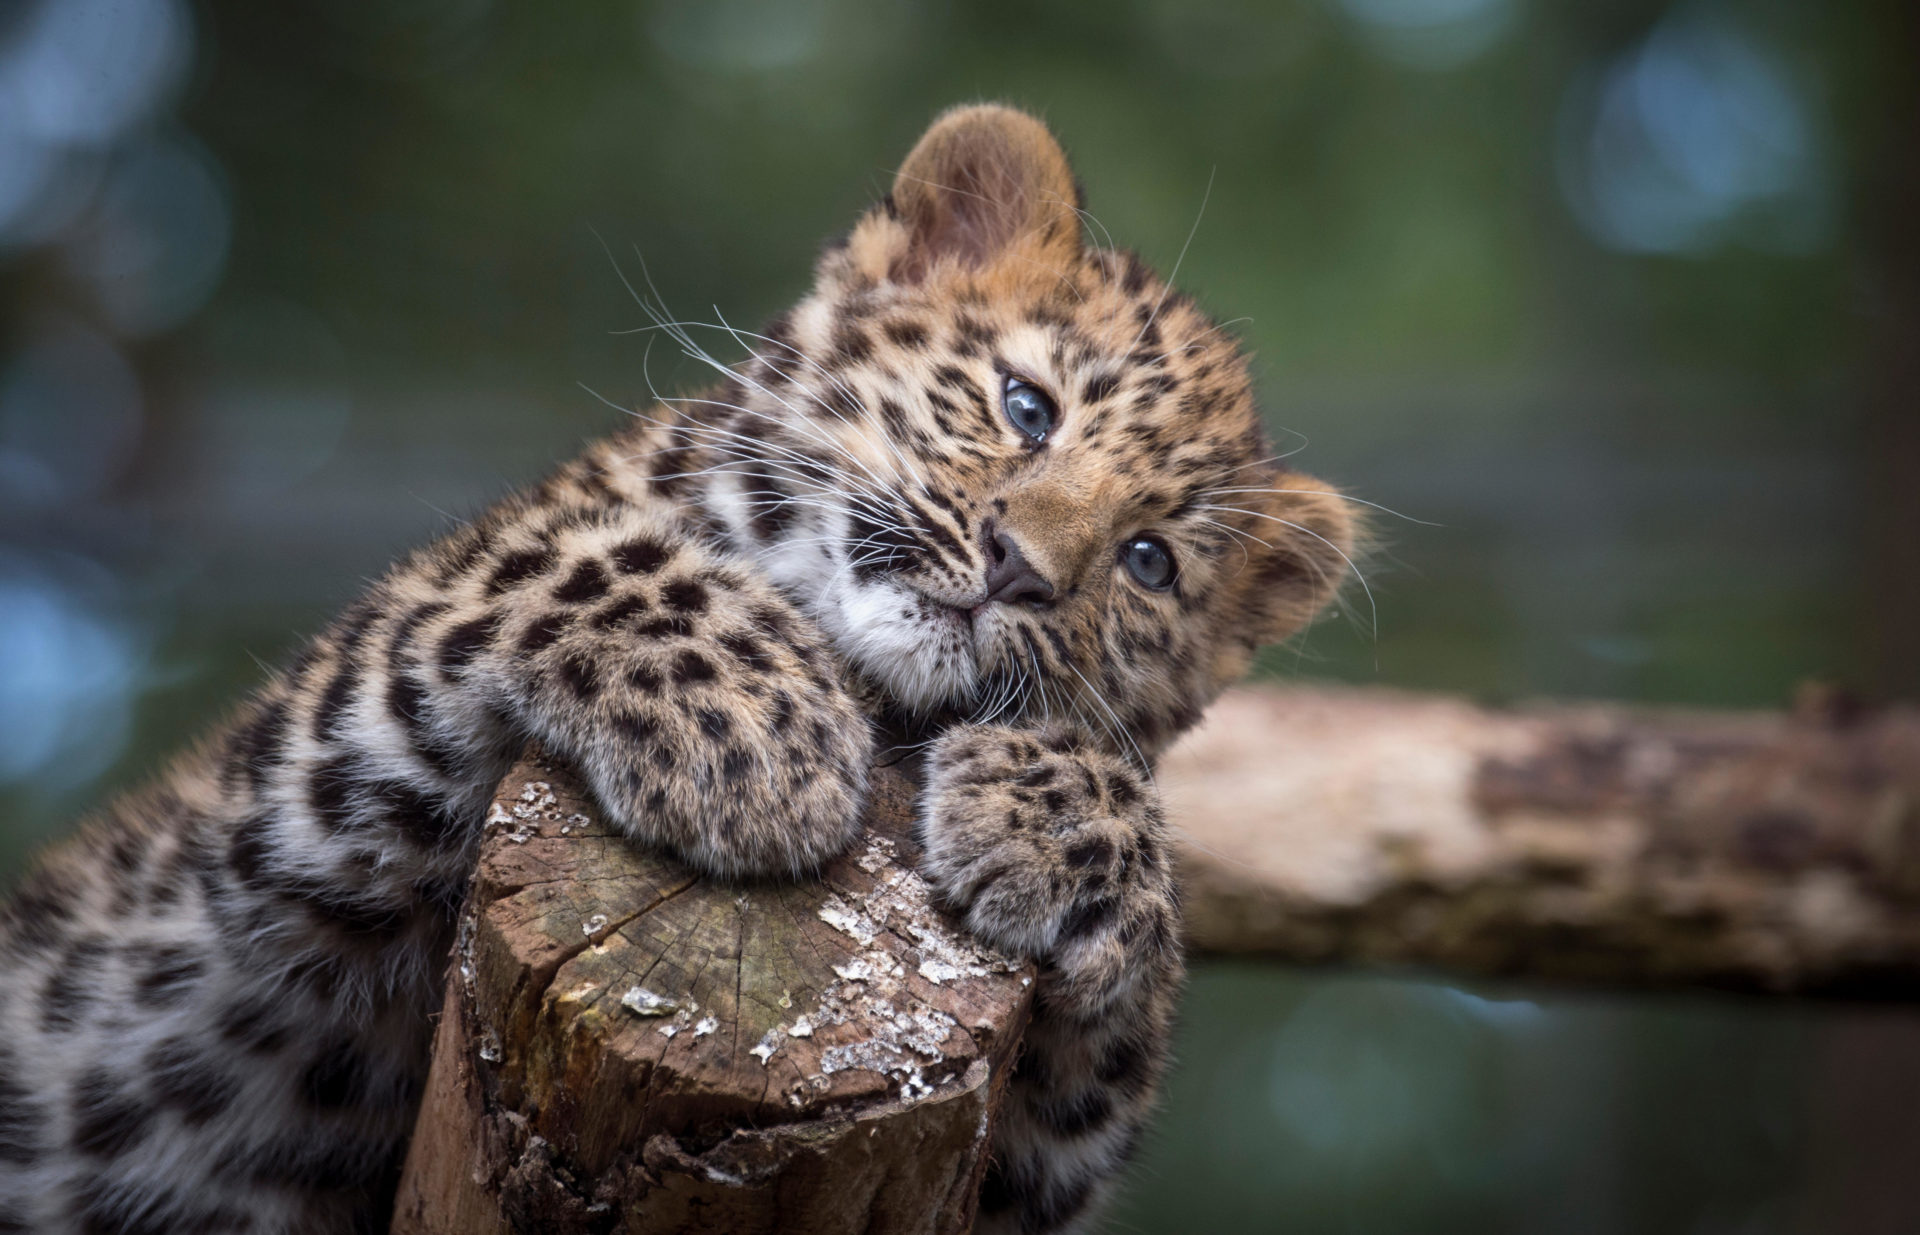 Female Amur leopard cub, one of the rarest big cats in the world, with only around 100 individuals left in the wild